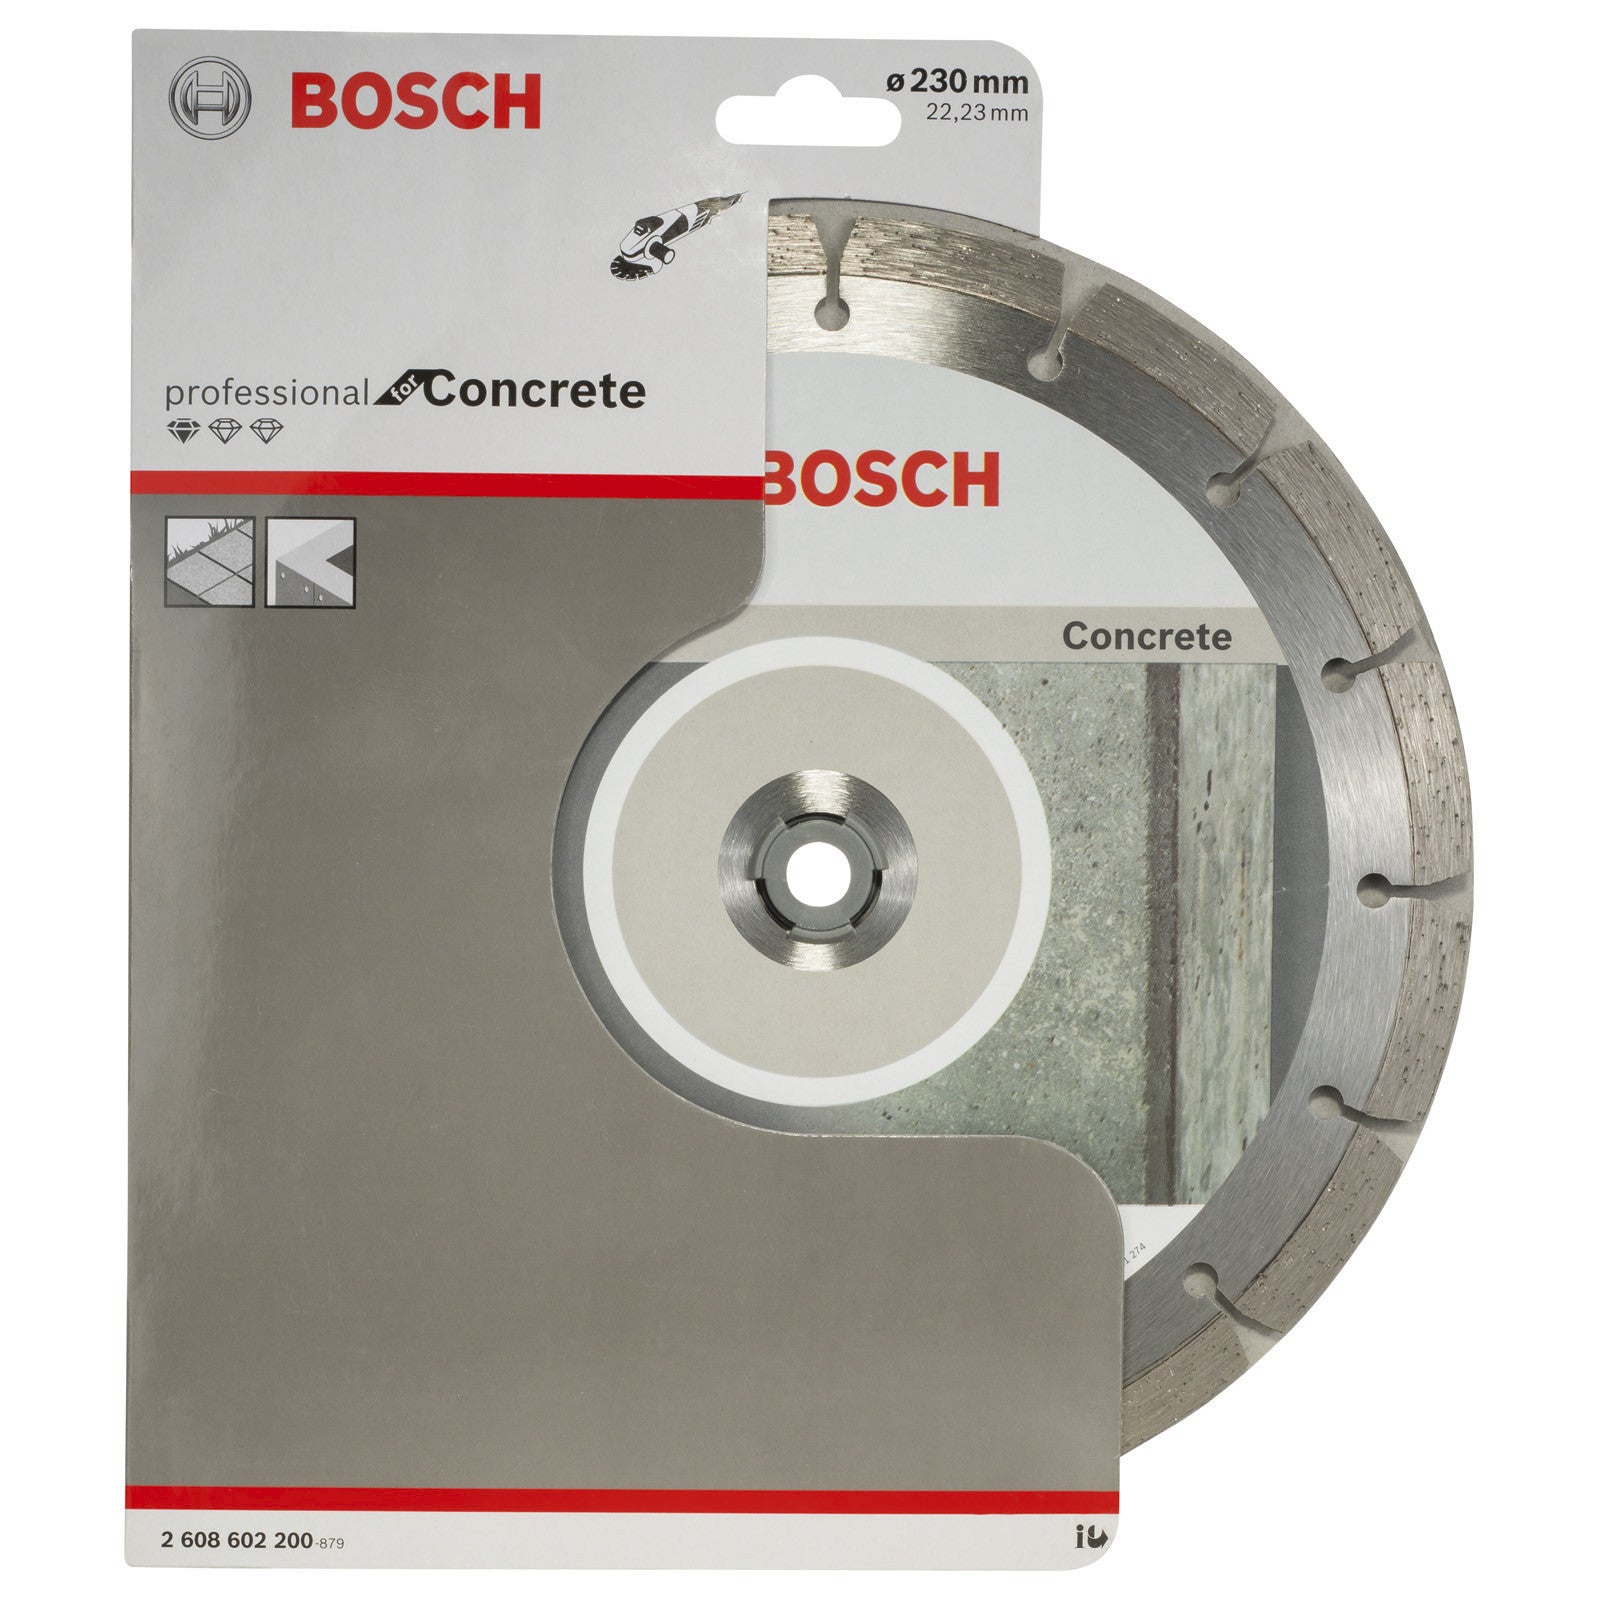 Bosch Standard for Concrete 230 x 22,23 x 2,3 x 10 segmented 2608602200 Power Tool Services